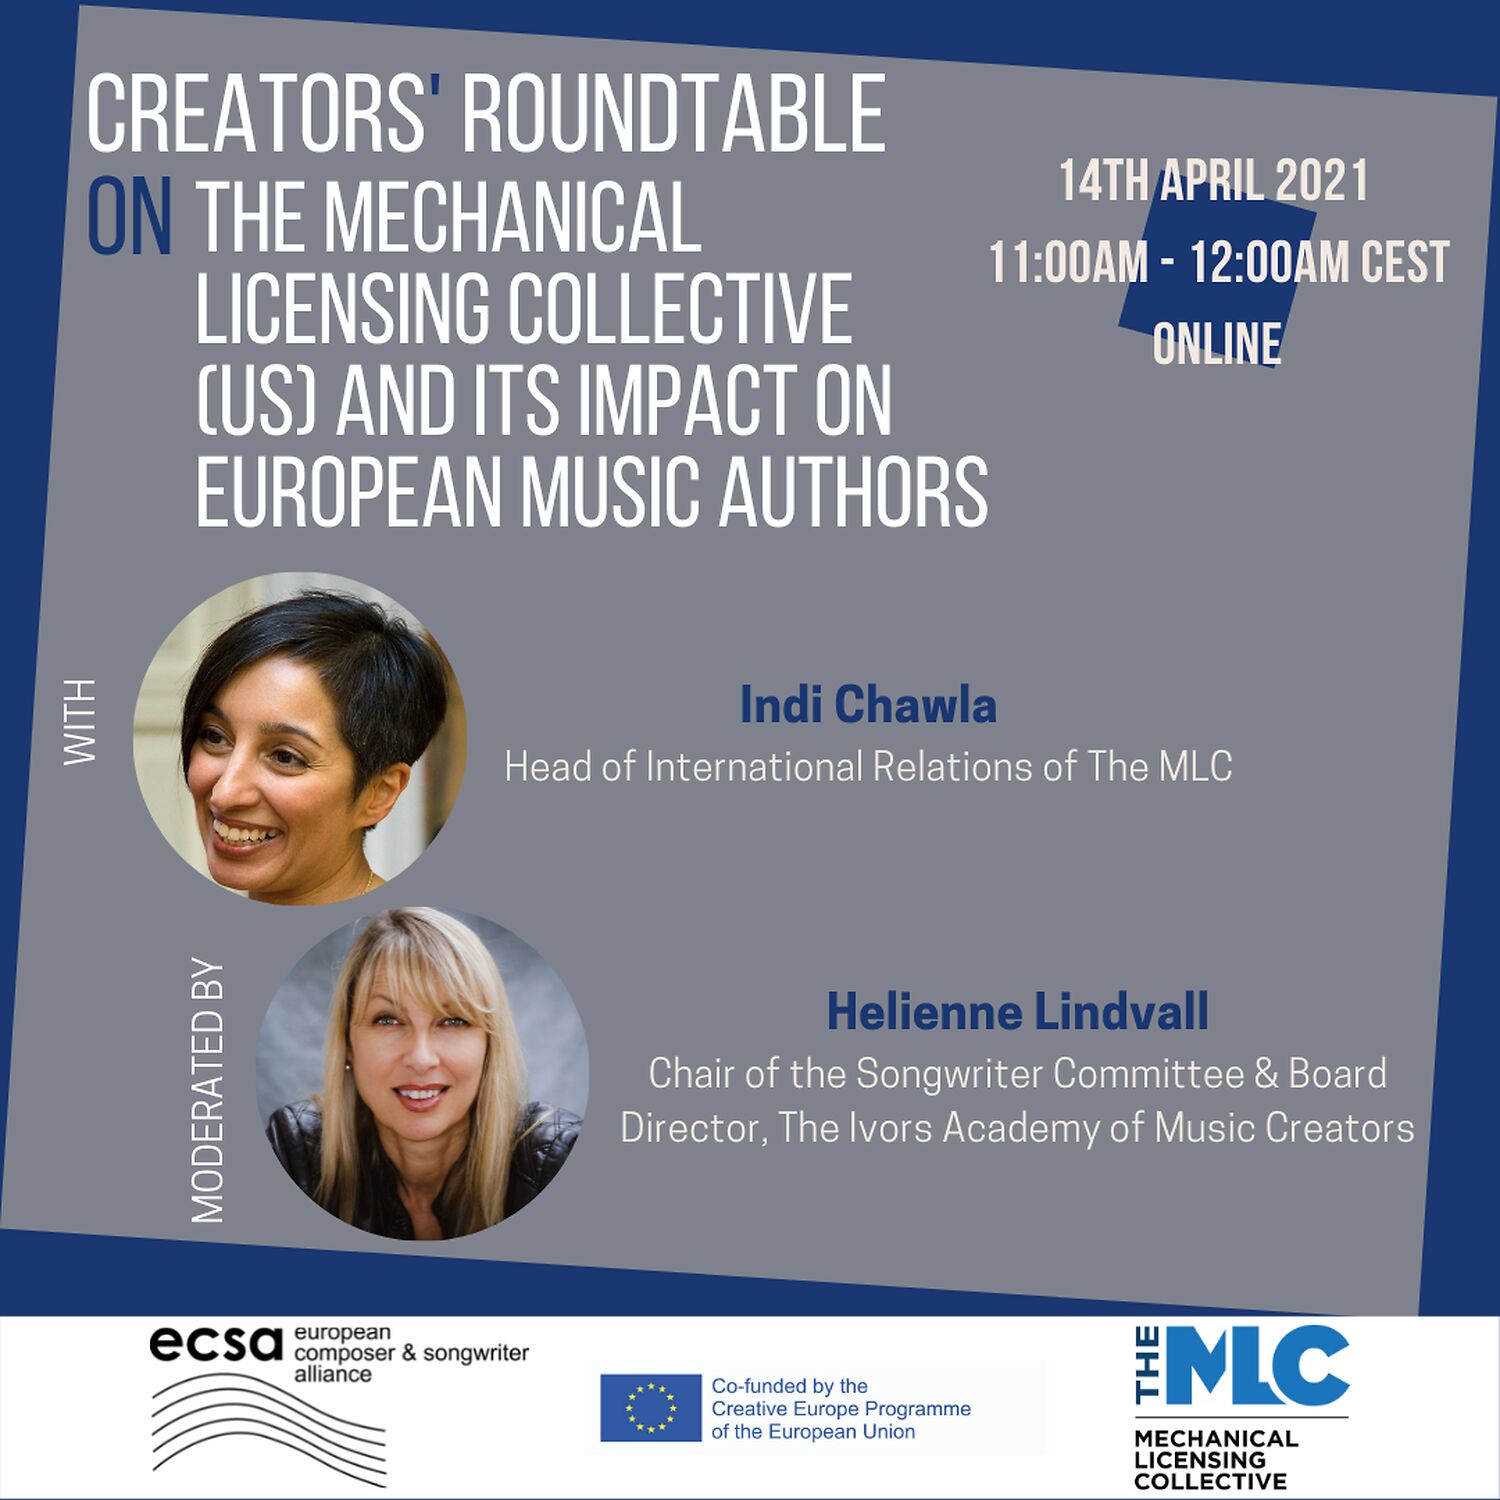 Creators' Roundtable on the Mechanical Licensing Collective (MLC) and its impact on European Music Authors